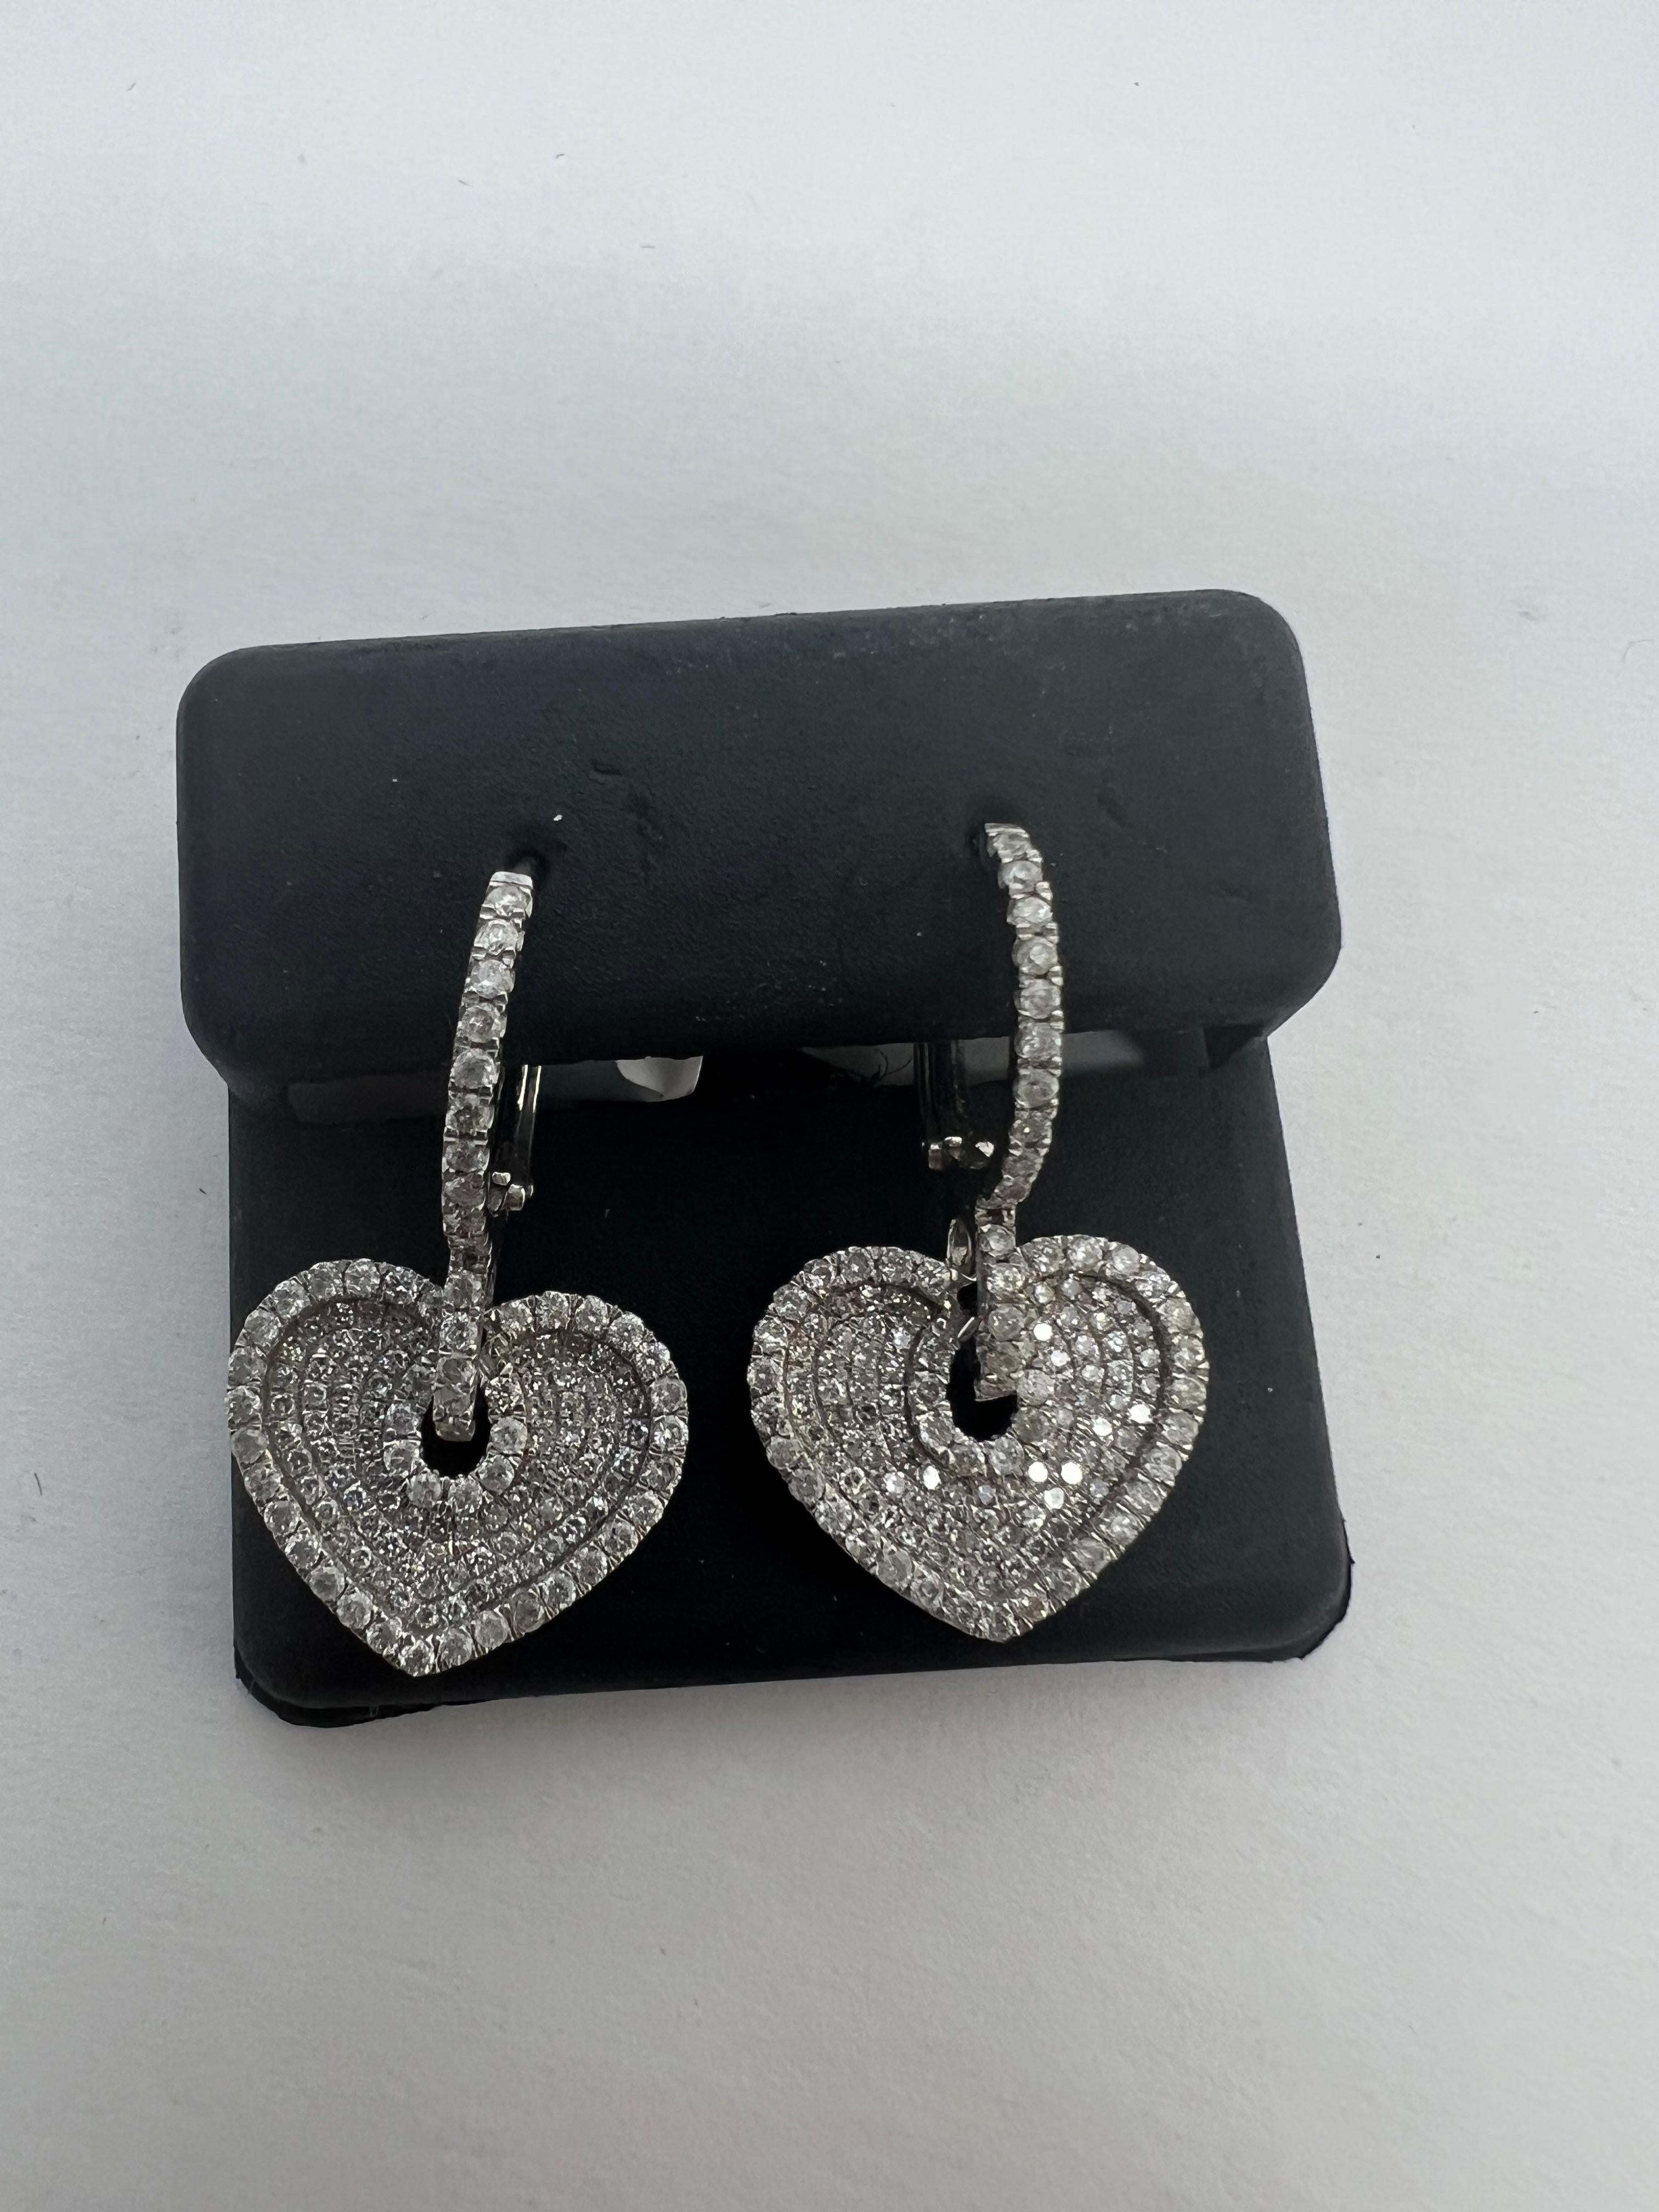 14k White Gold Diamond Pave Heart Drop Dangle Huggy Earrings

Total Carat Weight : 1.07 carats

Natural round Brilliant cut Diamonds

Color : G

Clarity Vs2-Si1

cut:  Very good

free overnight shipping shop with confidence

Evita Diamonds